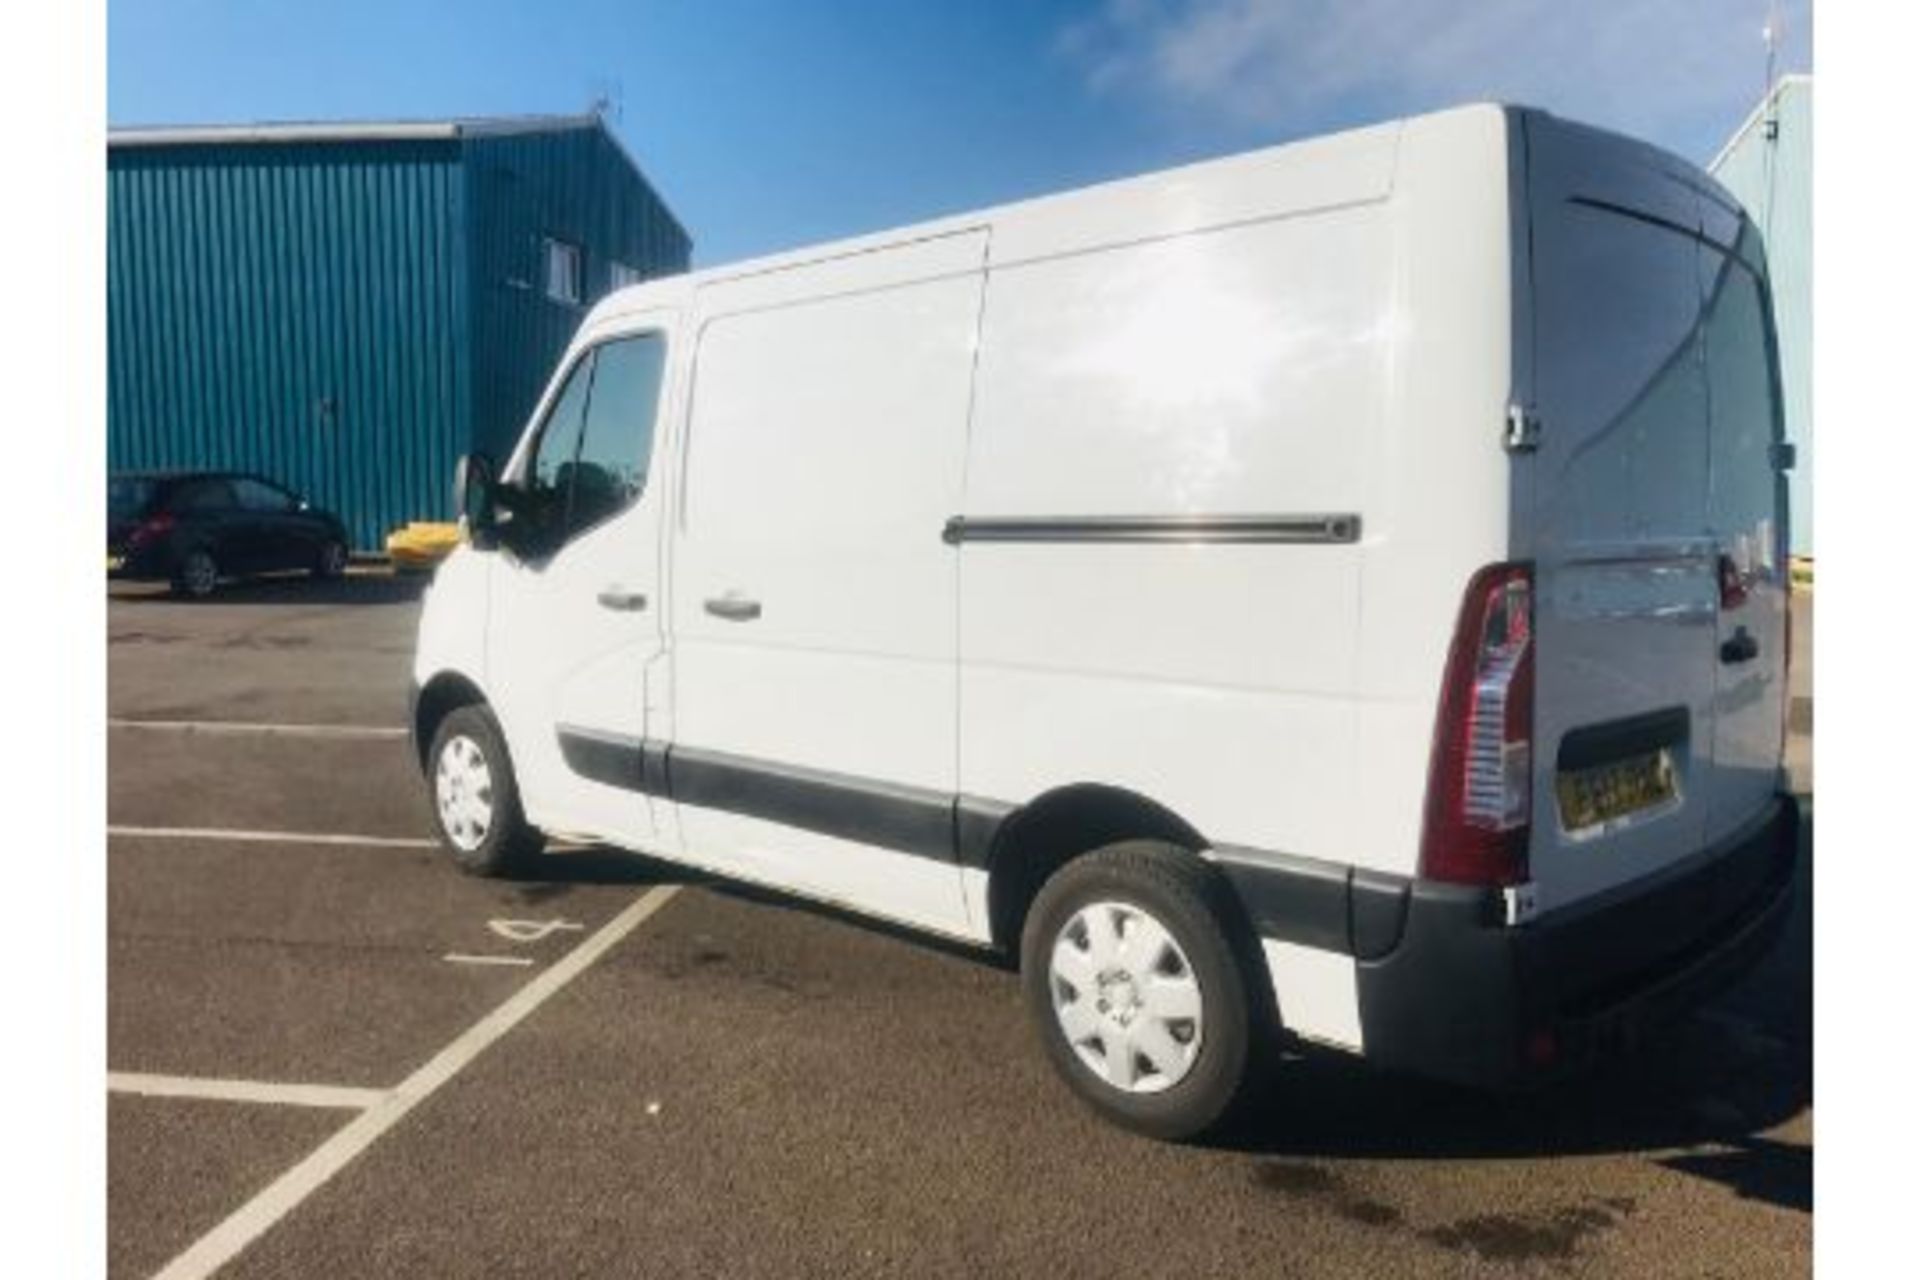 Vauxhall Movano F2800 2.3 CDTI - 2017 17 Reg - Air Con - 1 Keeper From New - Image 3 of 30